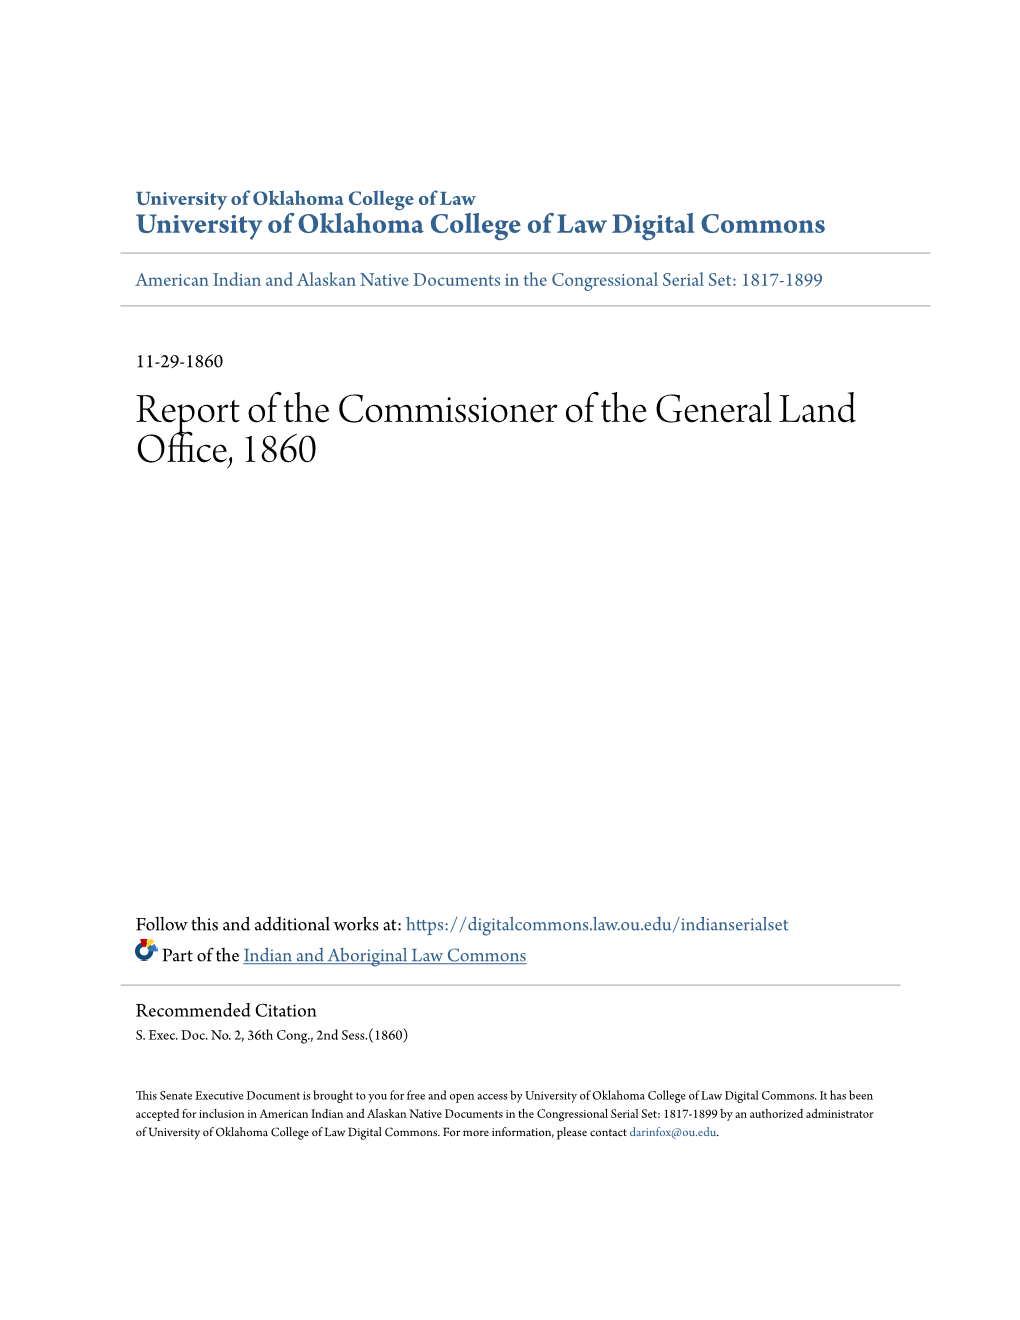 Report of the Commissioner of the General Land Office, 1860